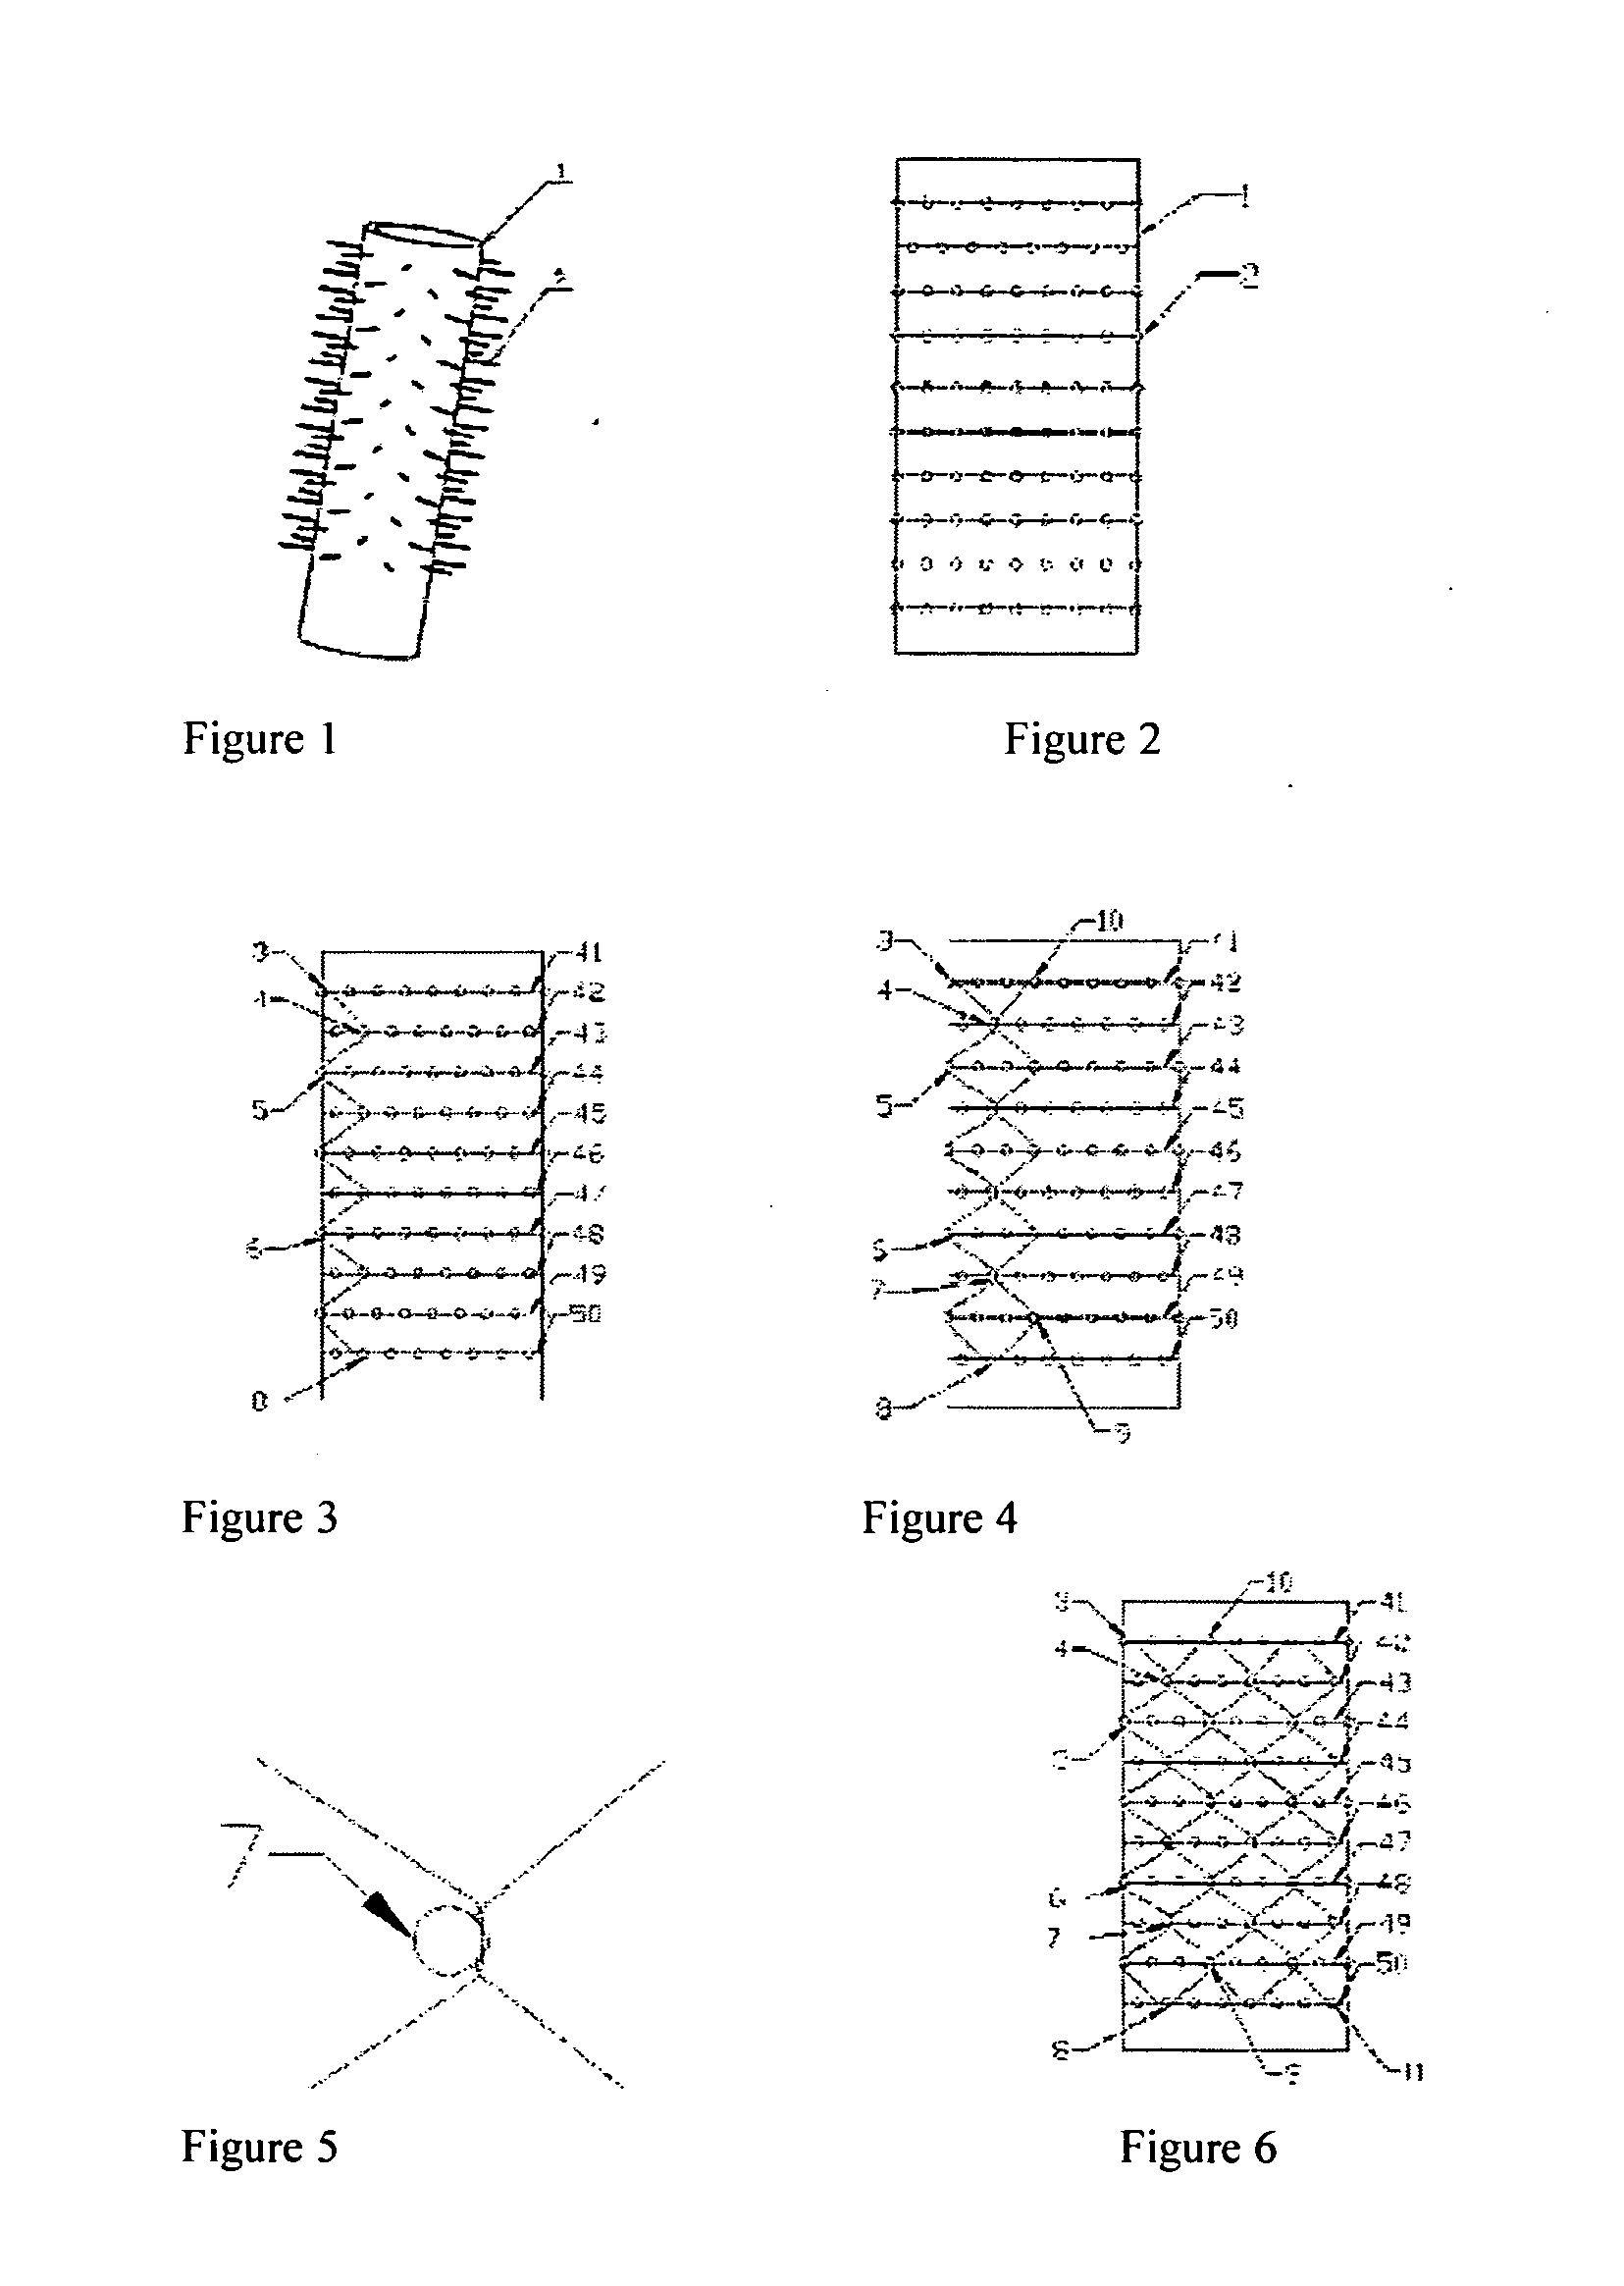 Braided Self-Expanding Endoluminal Stent and Manufacturing Method Thereof